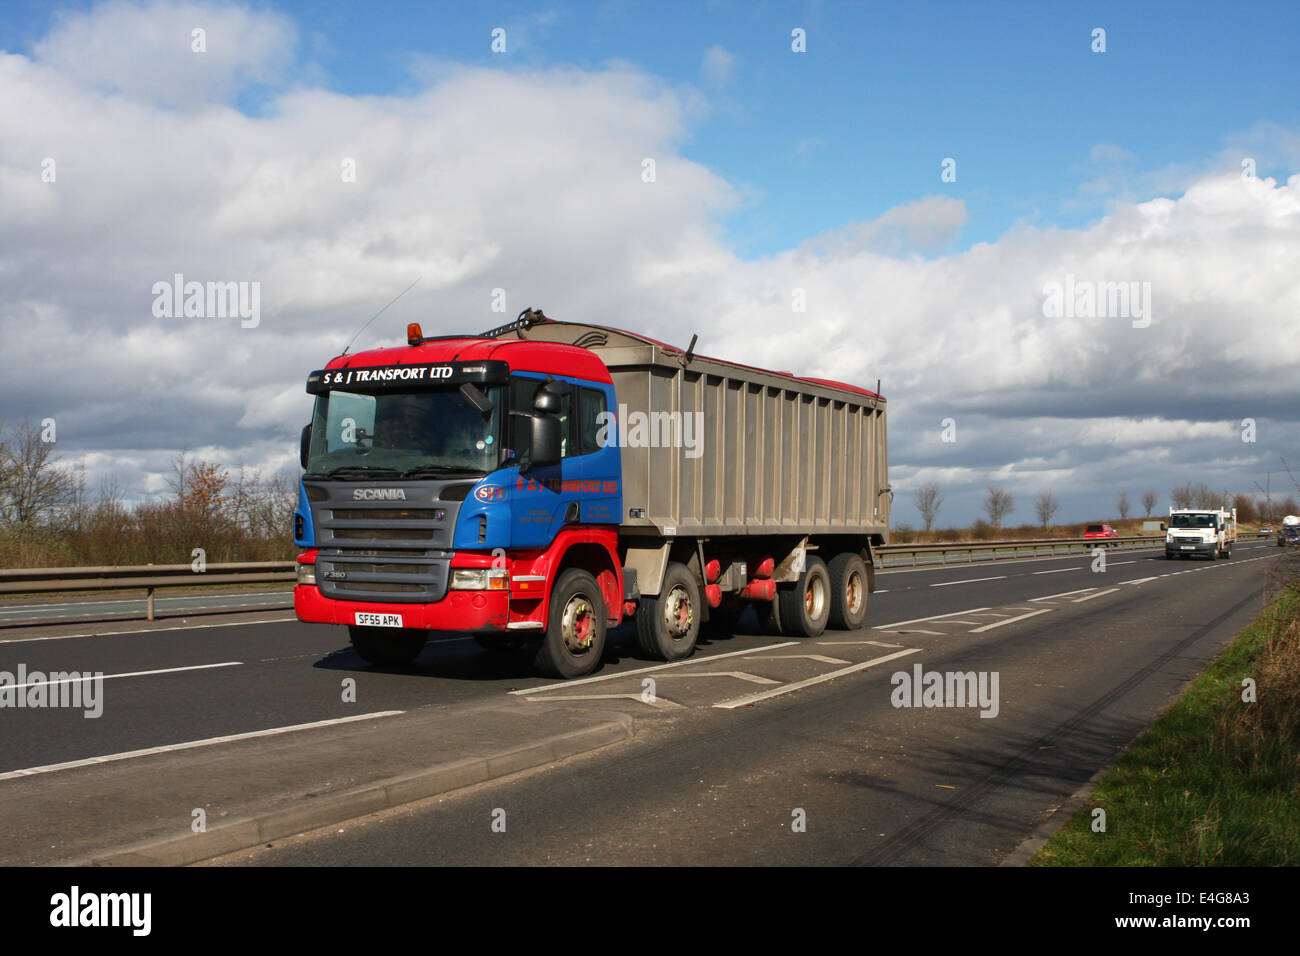 An S J Transport Ltd Tipping Truck Traveling Along The 6 Dual Carriageway In Leicestershire England Stock Photo Alamy